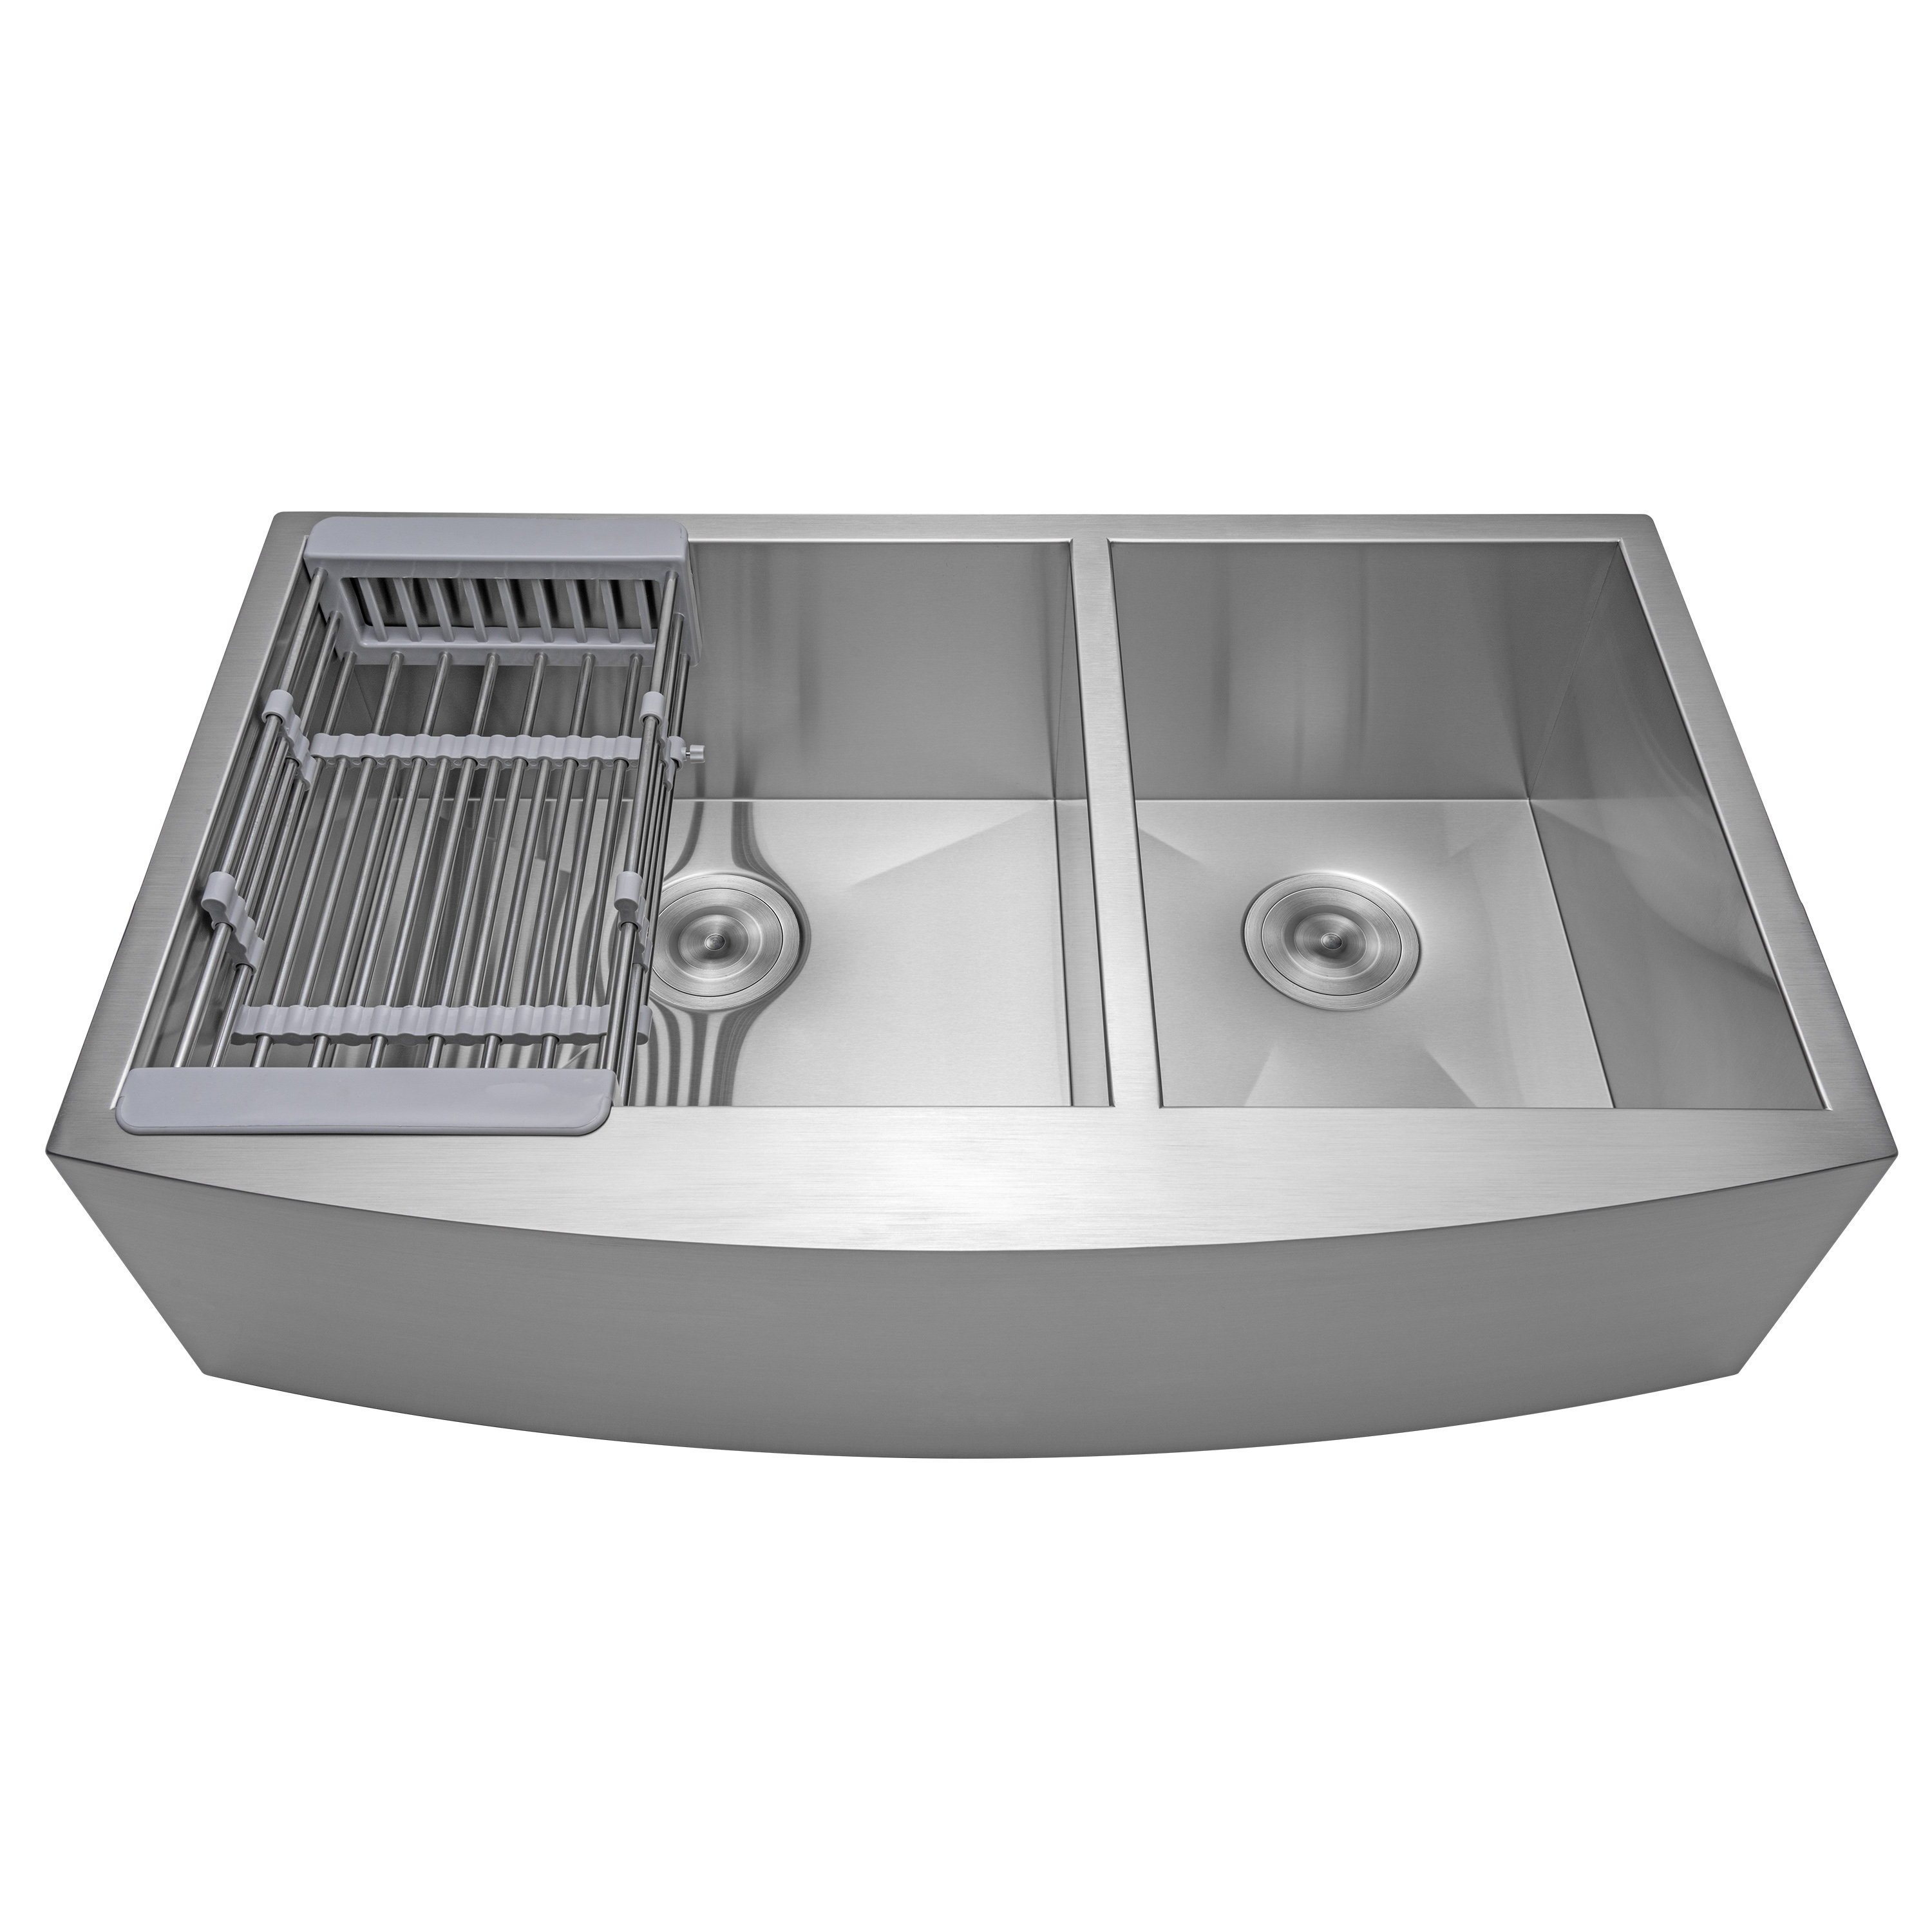 33 X 22 Farmhouse Apron Stainless Steel Double Bowl 60 40 Kitchen Sink W Adjustable Tray And Drain Strainer Kit